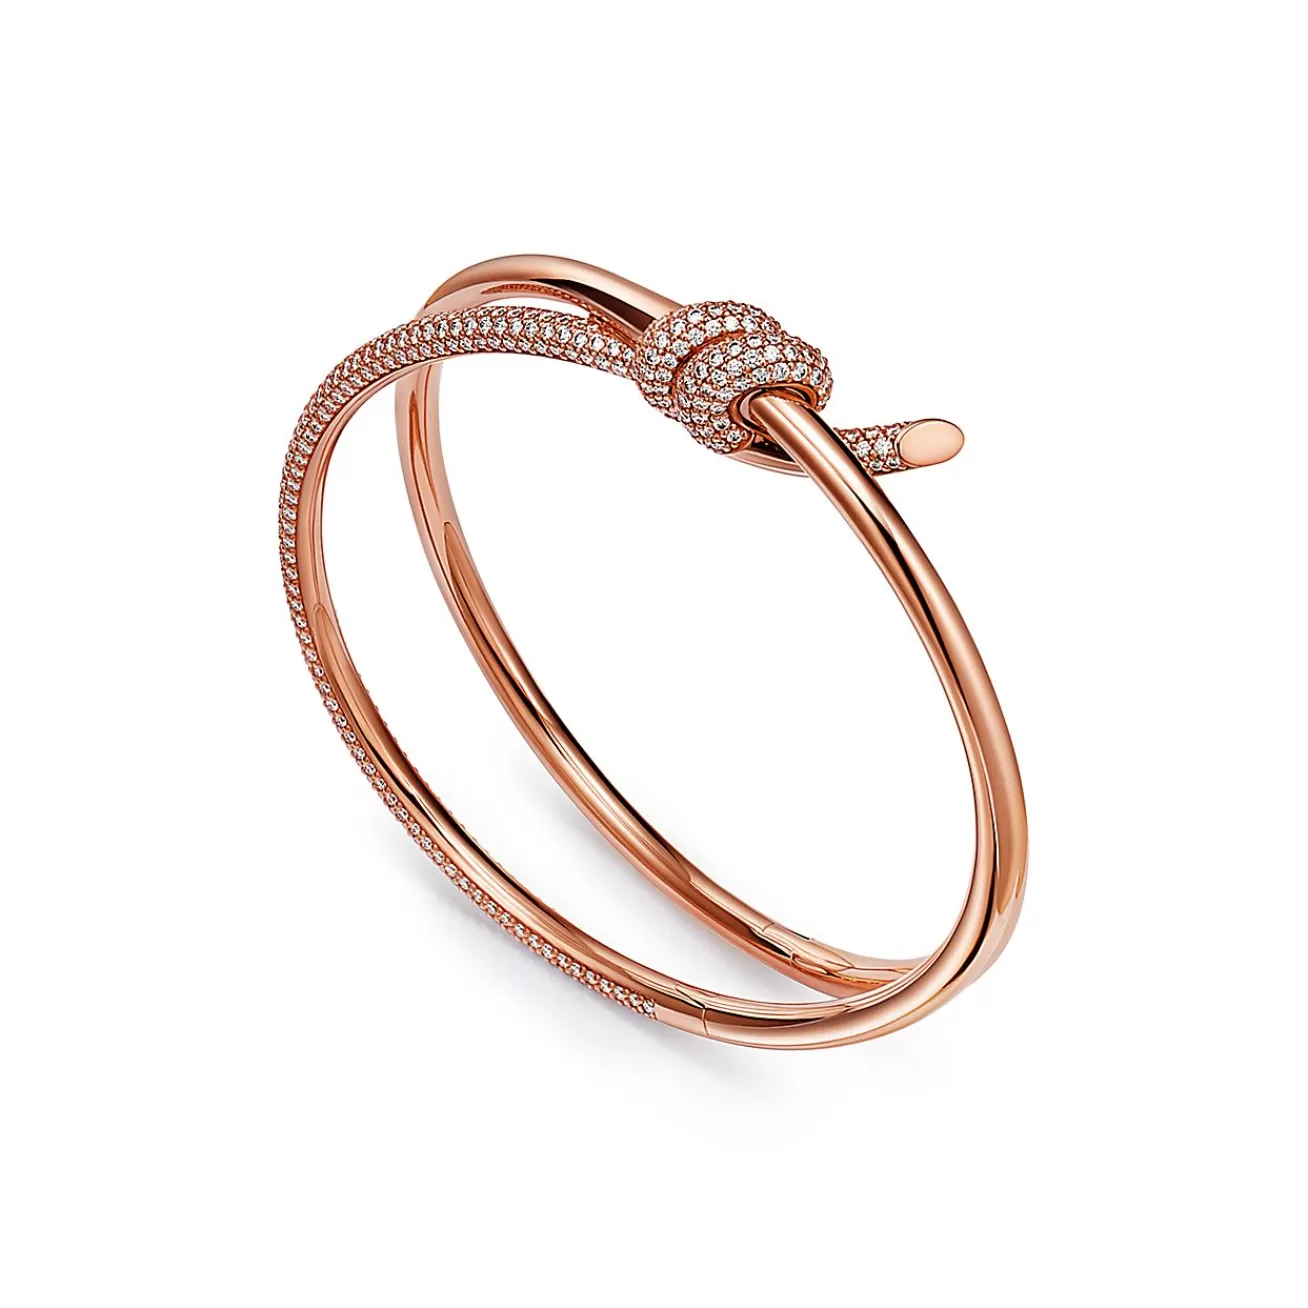 Tiffany & Co. Tiffany Knot Double Row Hinged Bangle in Rose Gold with Diamonds | ^ Bracelets | Rose Gold Jewelry